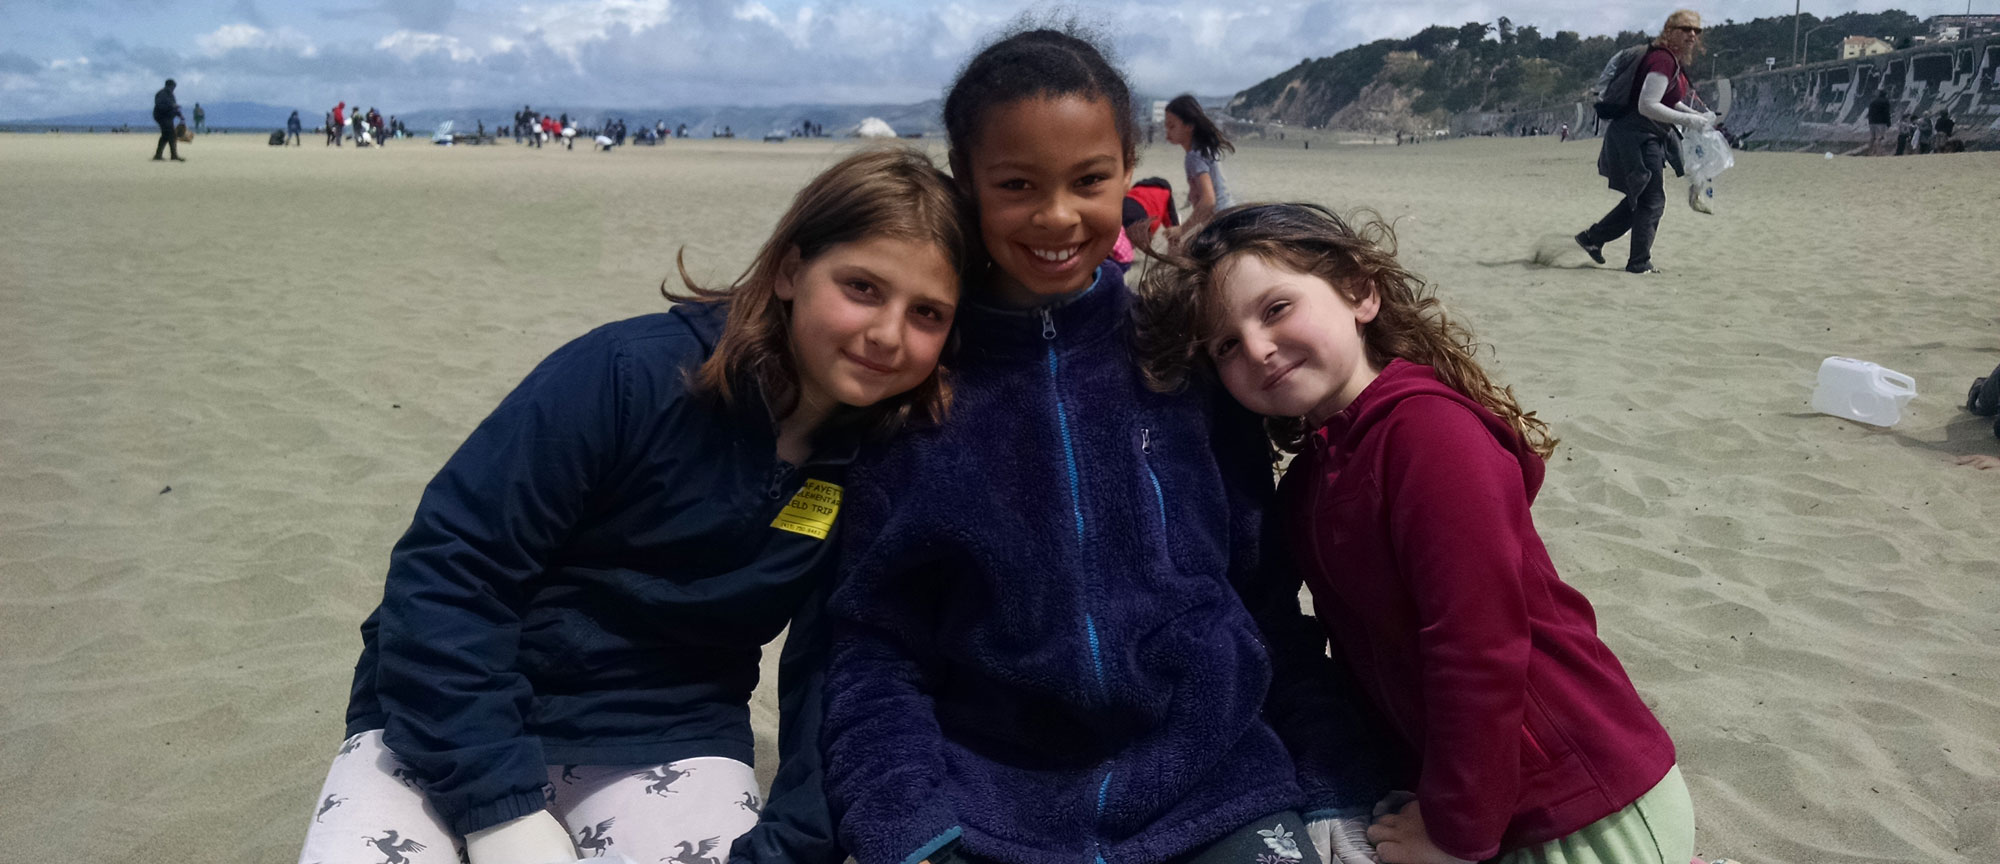 Smiling girls at a beach cleanup